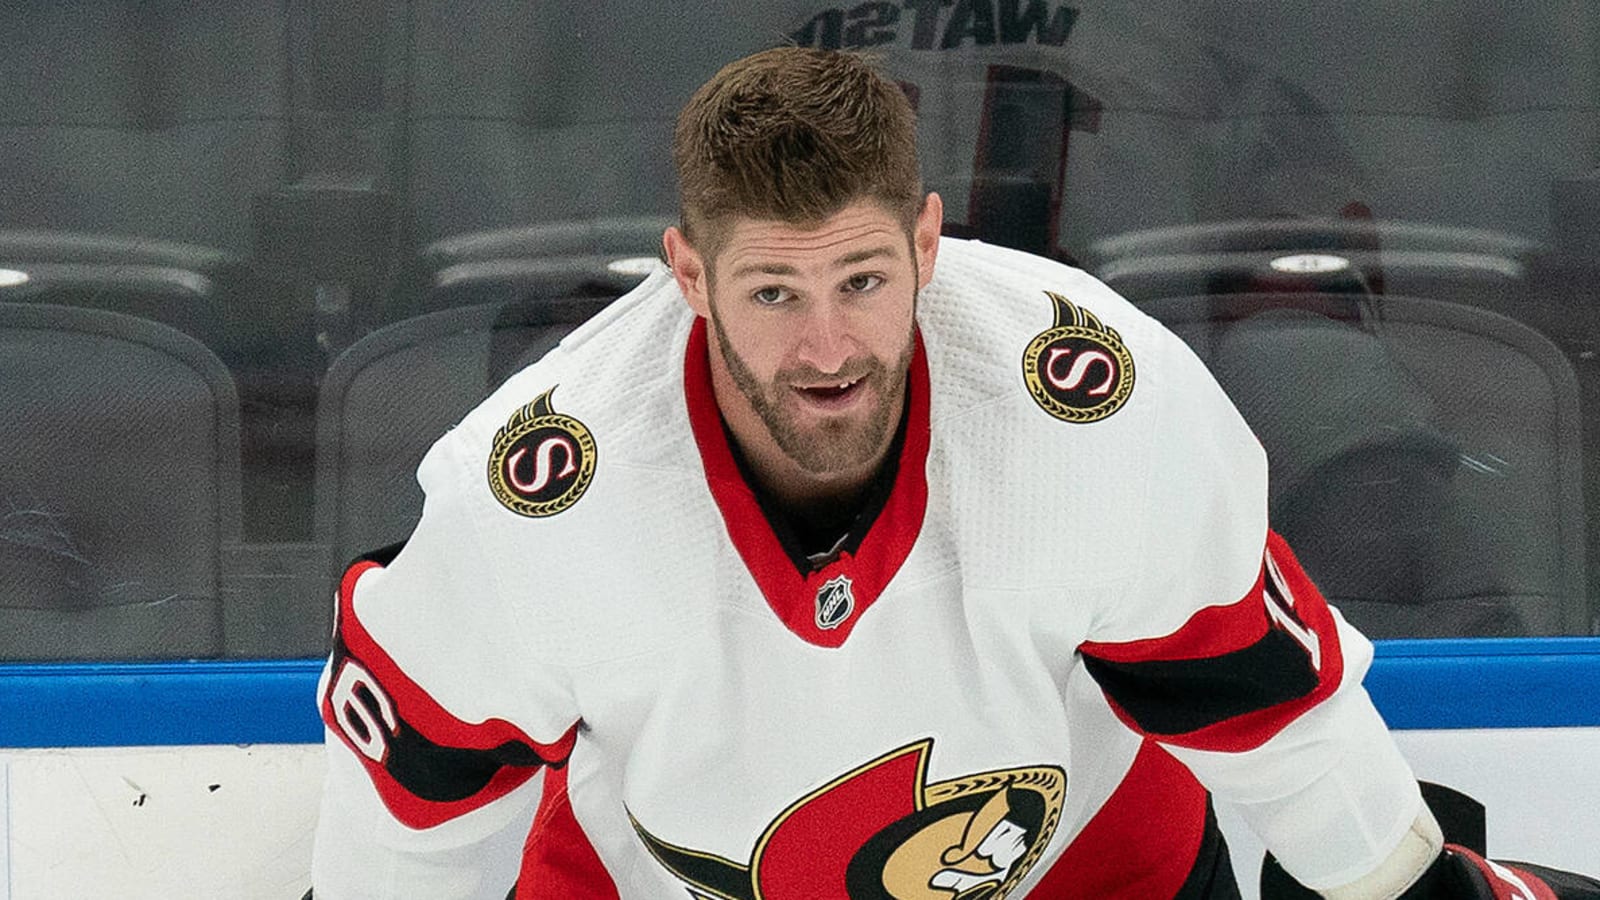 Senators' Austin Watson to have hearing for hit on Bruins' Jack Ahcan